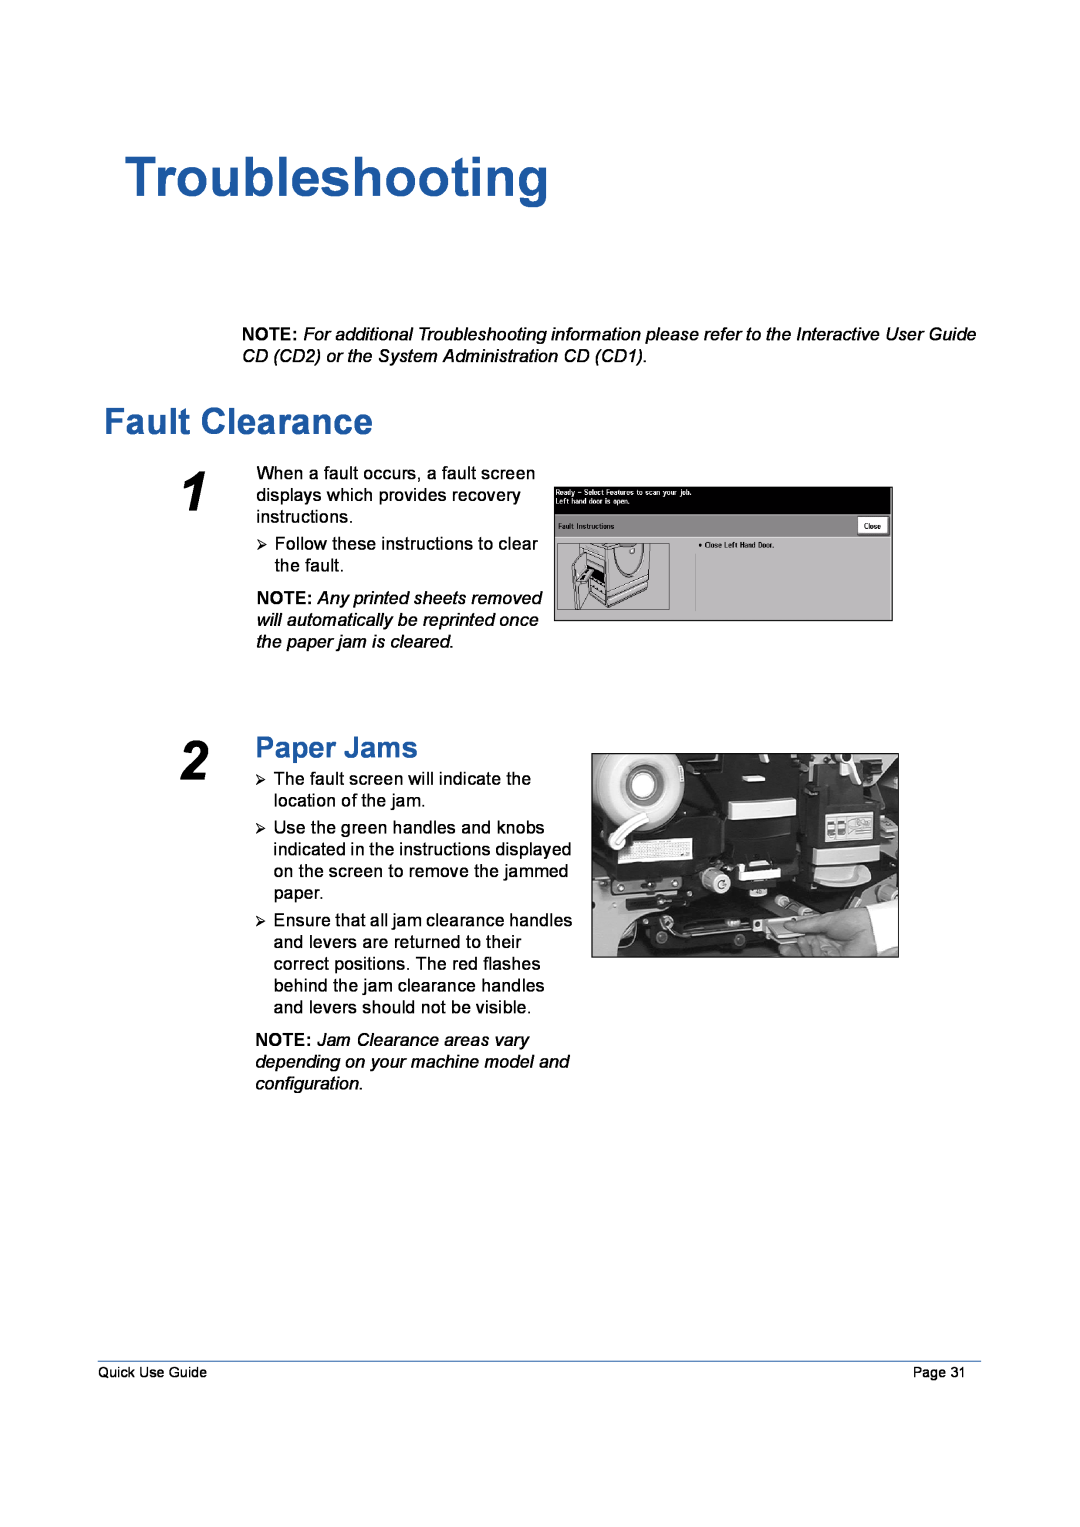 Xerox 5632 manual Troubleshooting, Fault Clearance, Paper Jams 